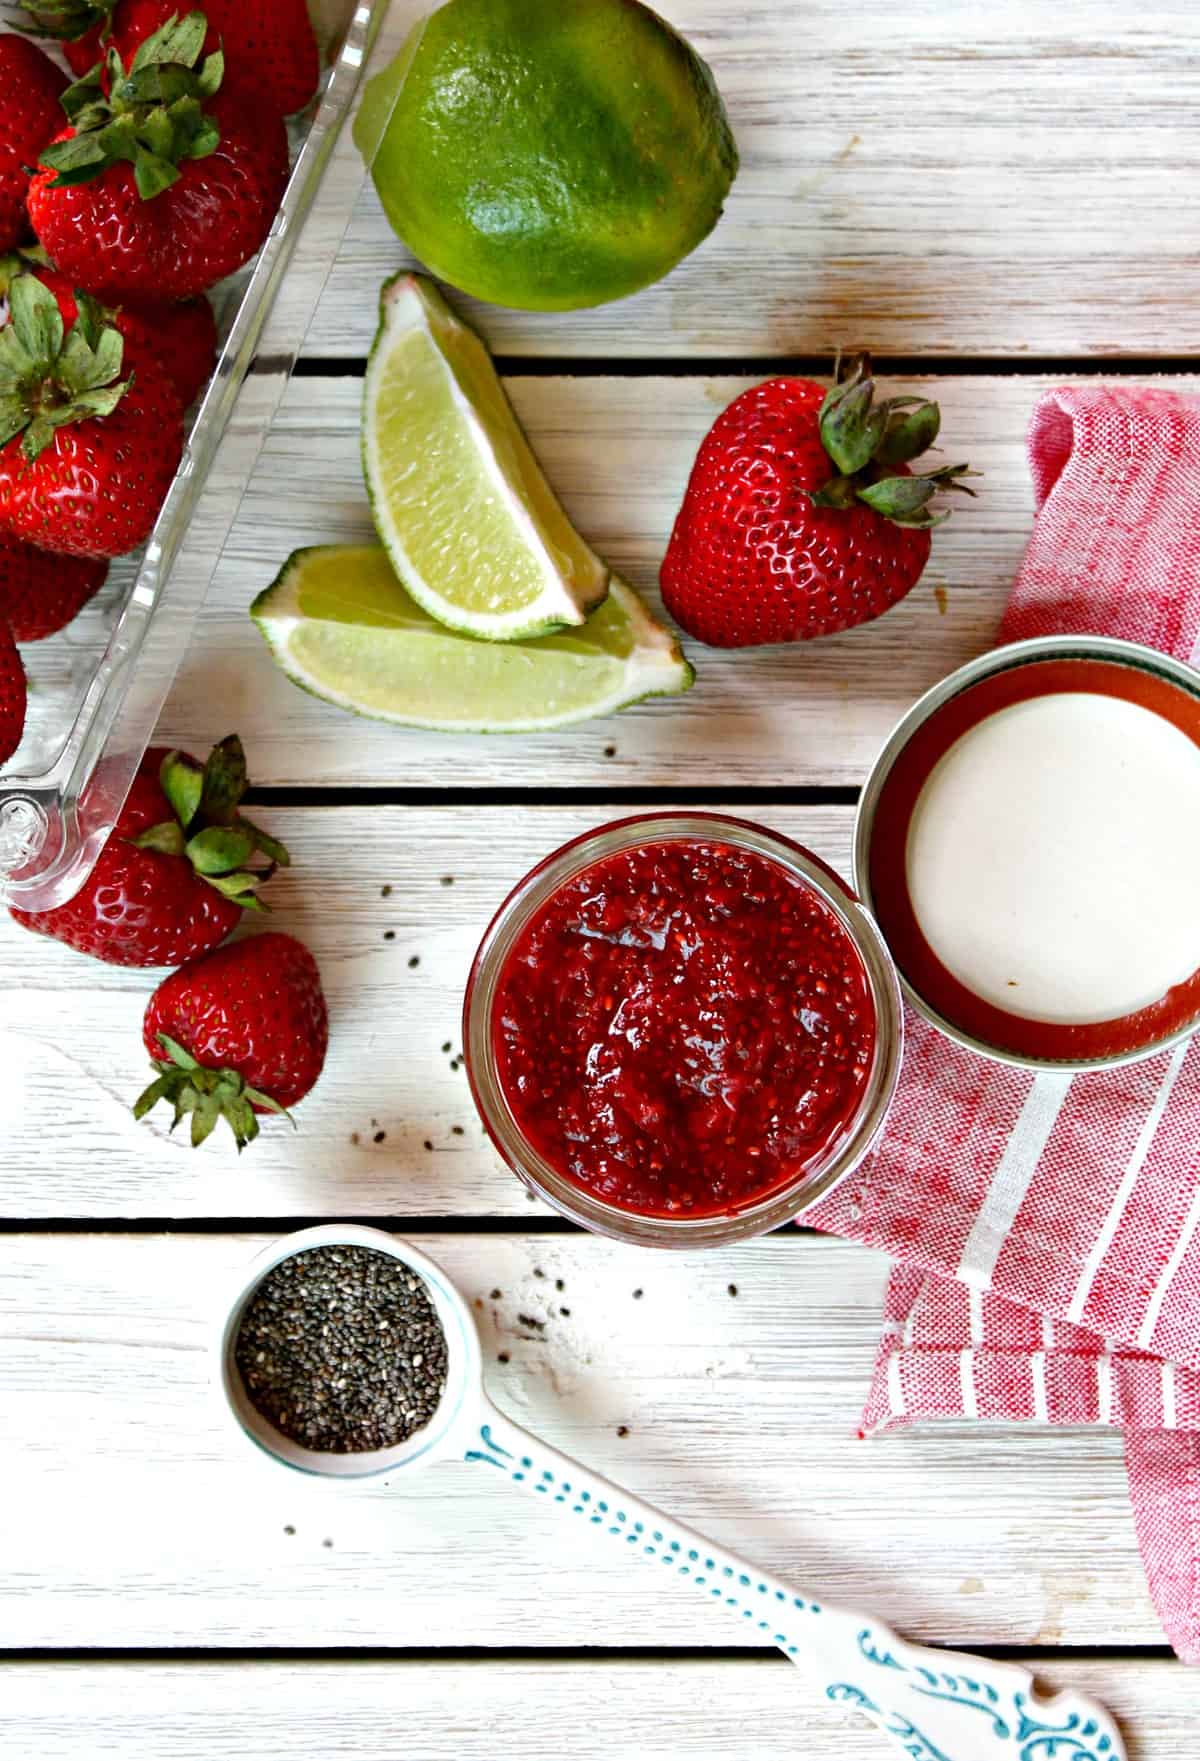 Strawberry Lime Chia Jam! Preserve the sweet, tantalizing flavors of summer with a quick, homemade jam. Chia seeds help thicken and gel this easy jam, so there's no need for pectin or excessive sugar. An easy way to enjoy berries year-round!